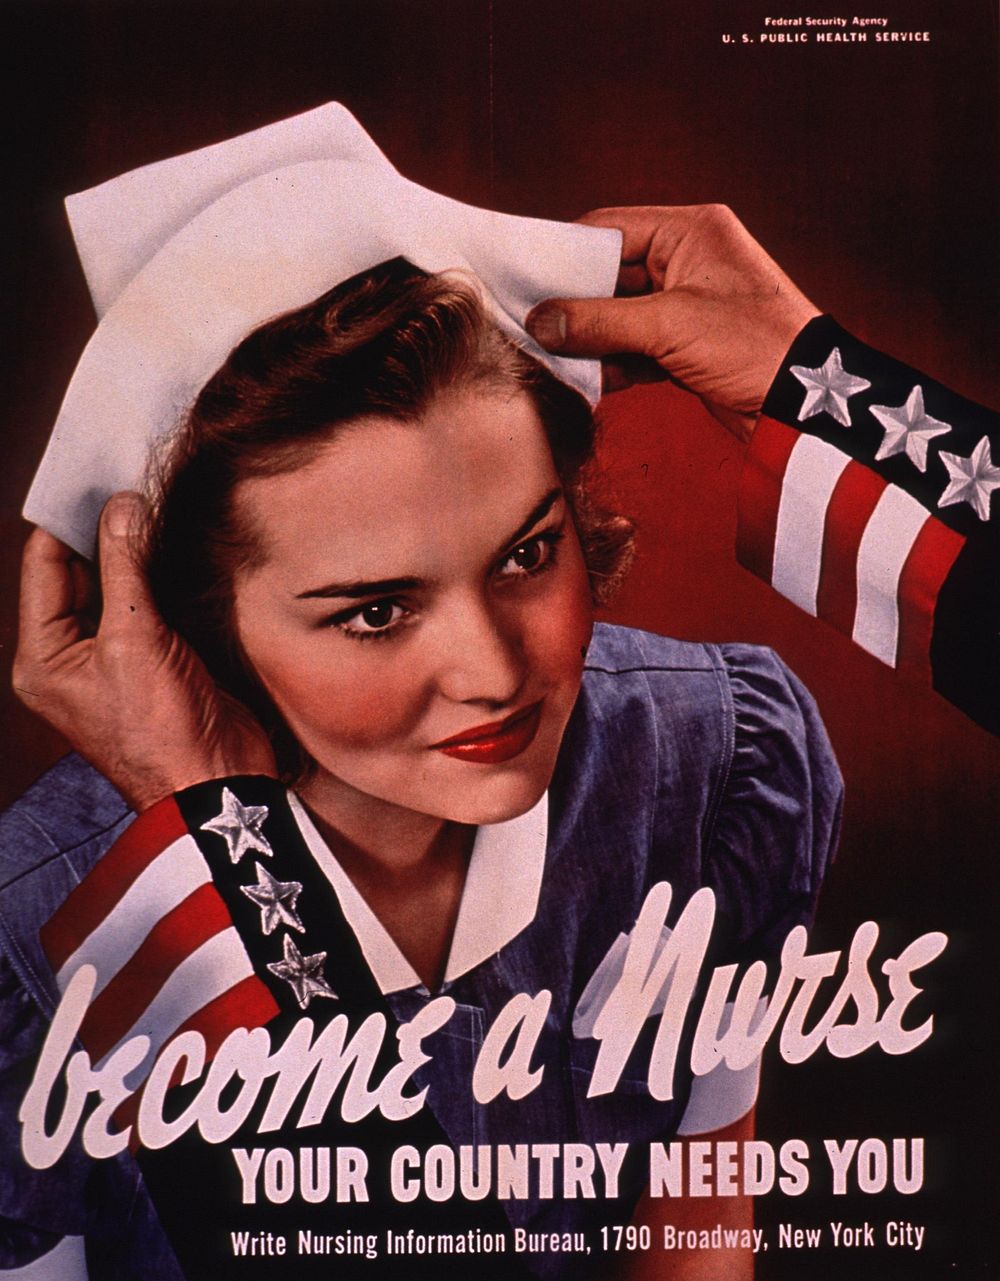 Become a nurse, your country needs you. Multicolor poster with white lettering. Some publisher information in upper right…